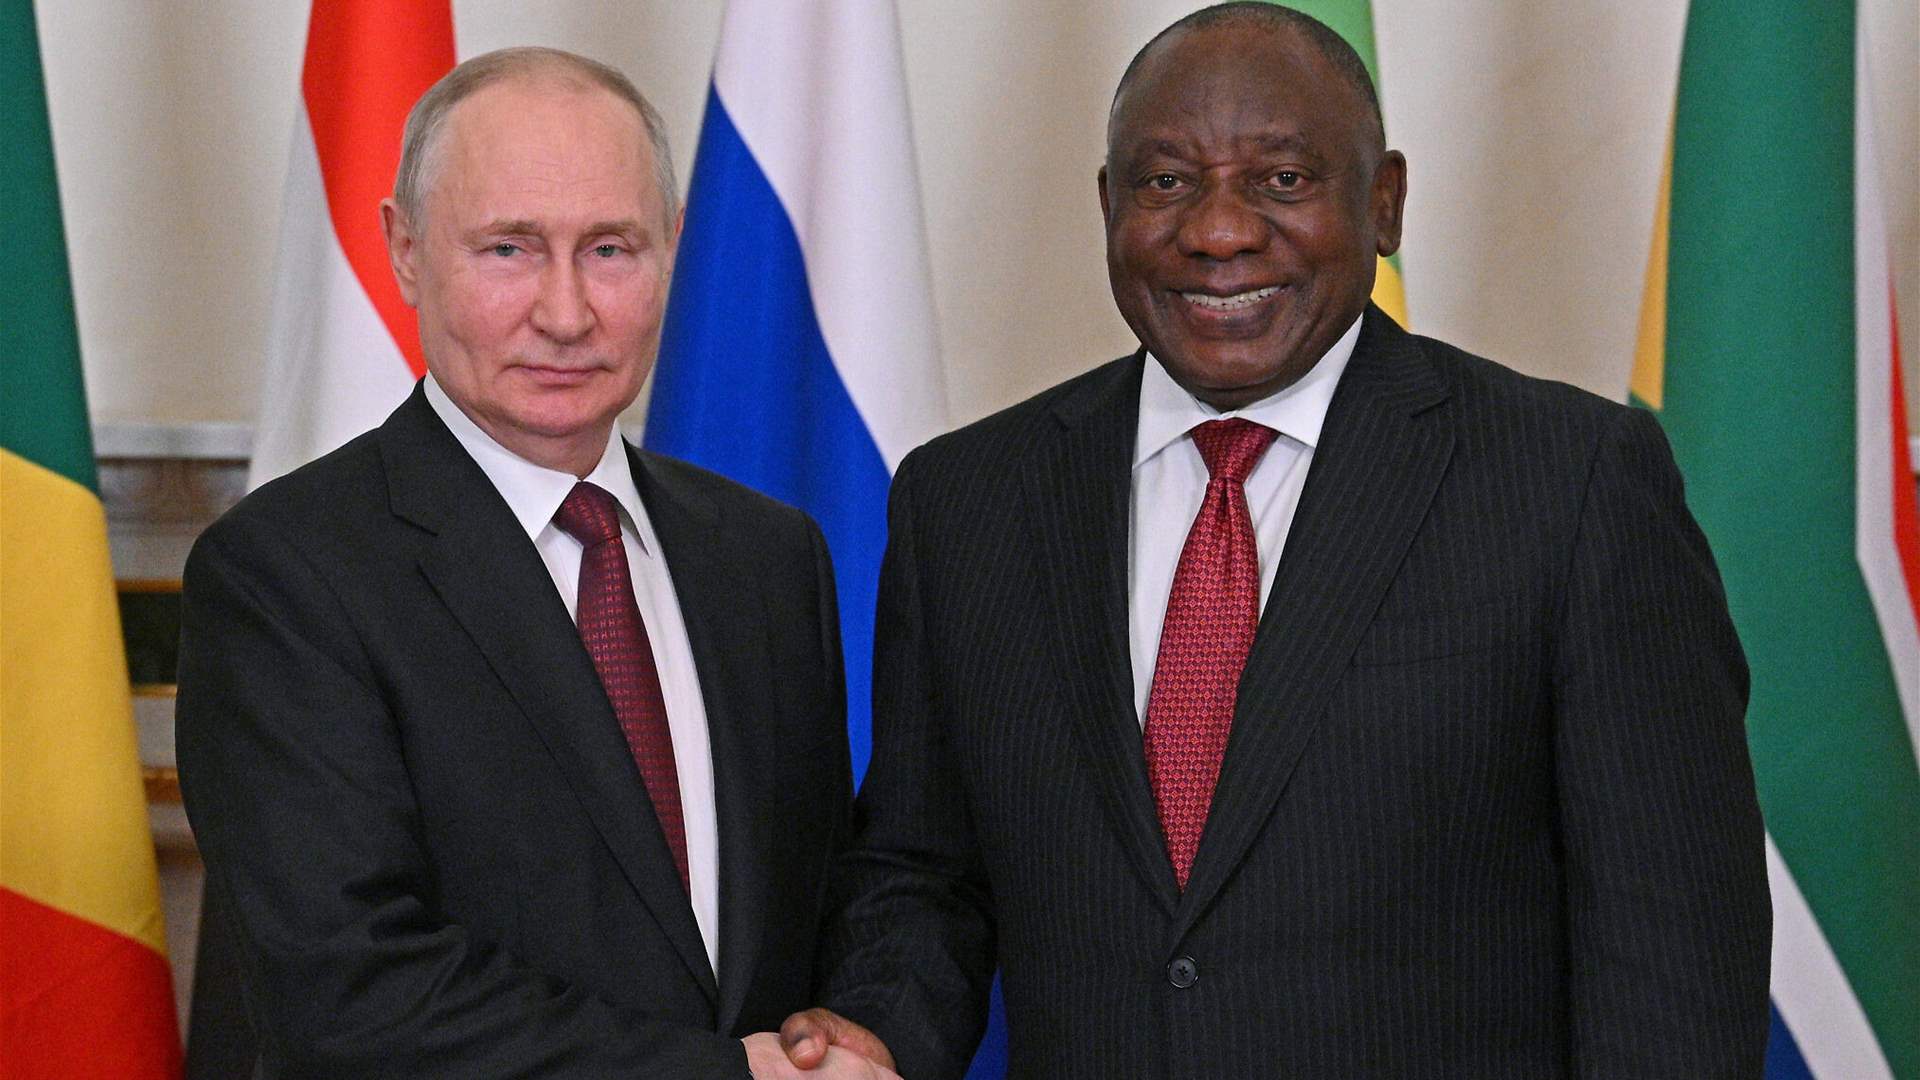 Putin hosts a summit with African countries to show a &quot;partnership&quot; for the future